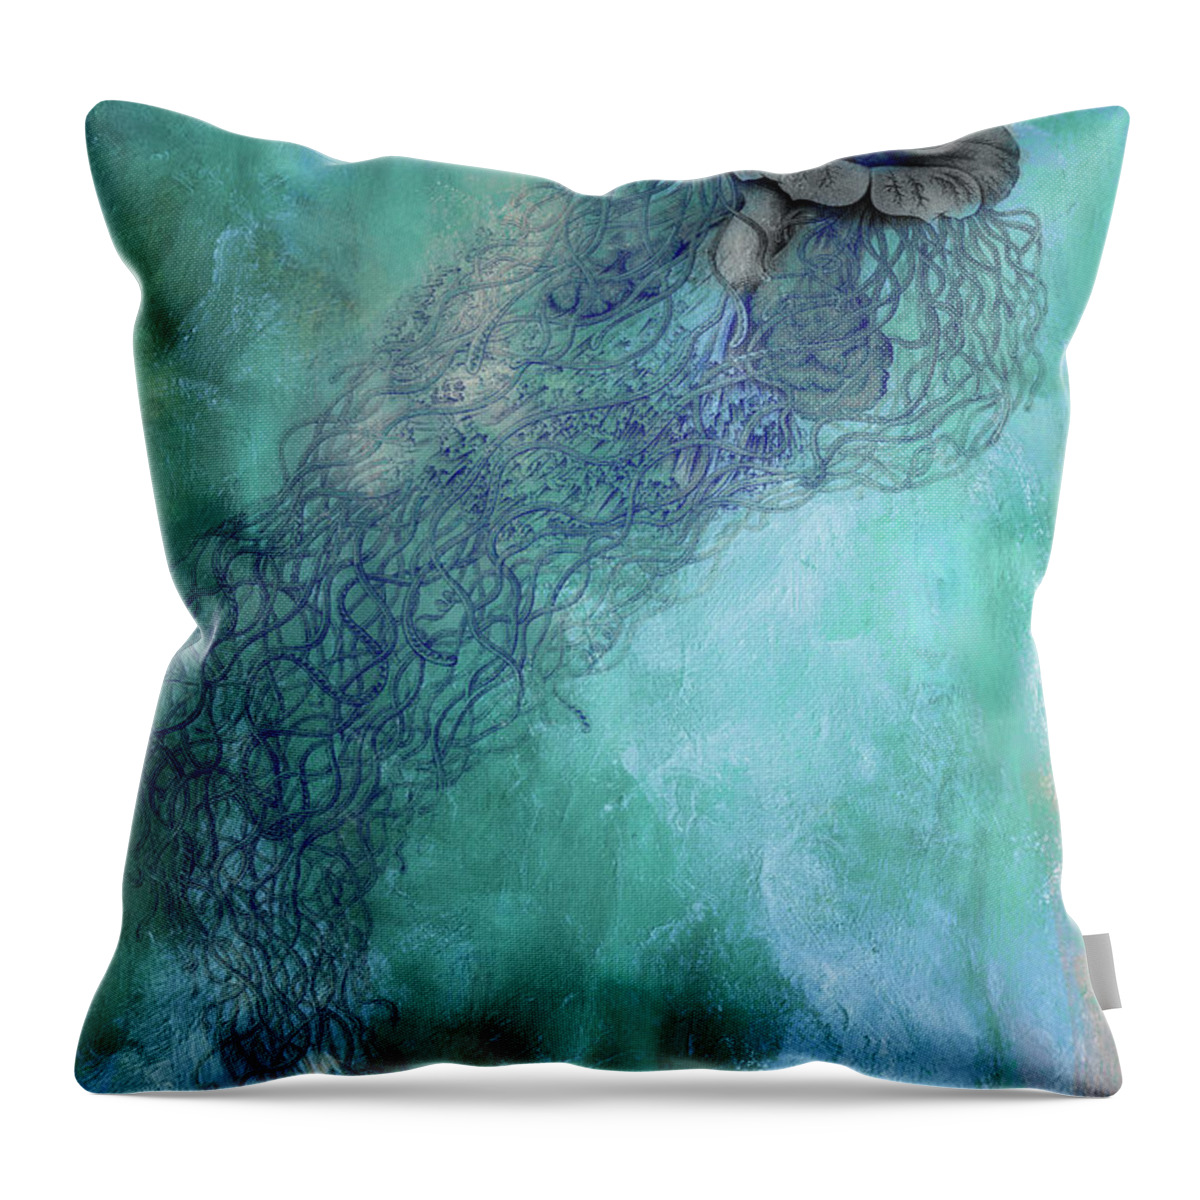 Jellyfish Throw Pillow featuring the painting Jellyfish by Mindy Sommers